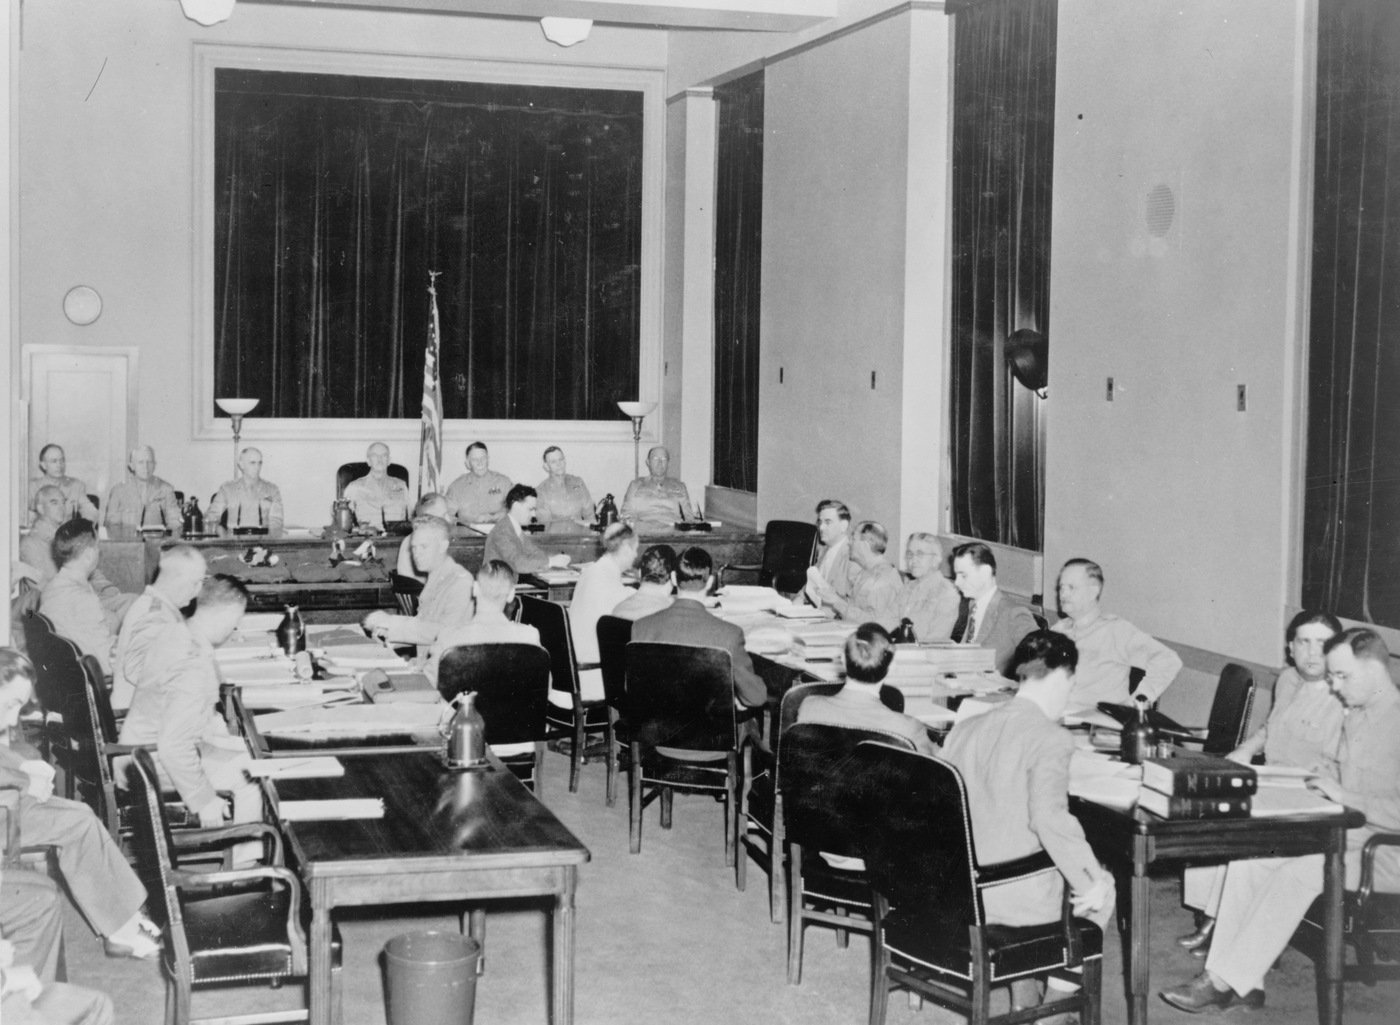 The special seven-man military commission opens the third day of its proceedings in the trial of eight Nazi saboteurs in the fifth floor courtroom of the Department of Justice building in July 1942. Sitting on the commission left to right are: Brigadier General John T. Lewis; Major General Lorenzo D. Casser; Major General Walter S. Grant; Major General Frank R. McCoy, president of the commission; Major General Blanton Winship; Brigadier General Guy V. Henry; and Brigadier General John T. Kennedy. All eight were found guilty. Library of Congress photograph. 